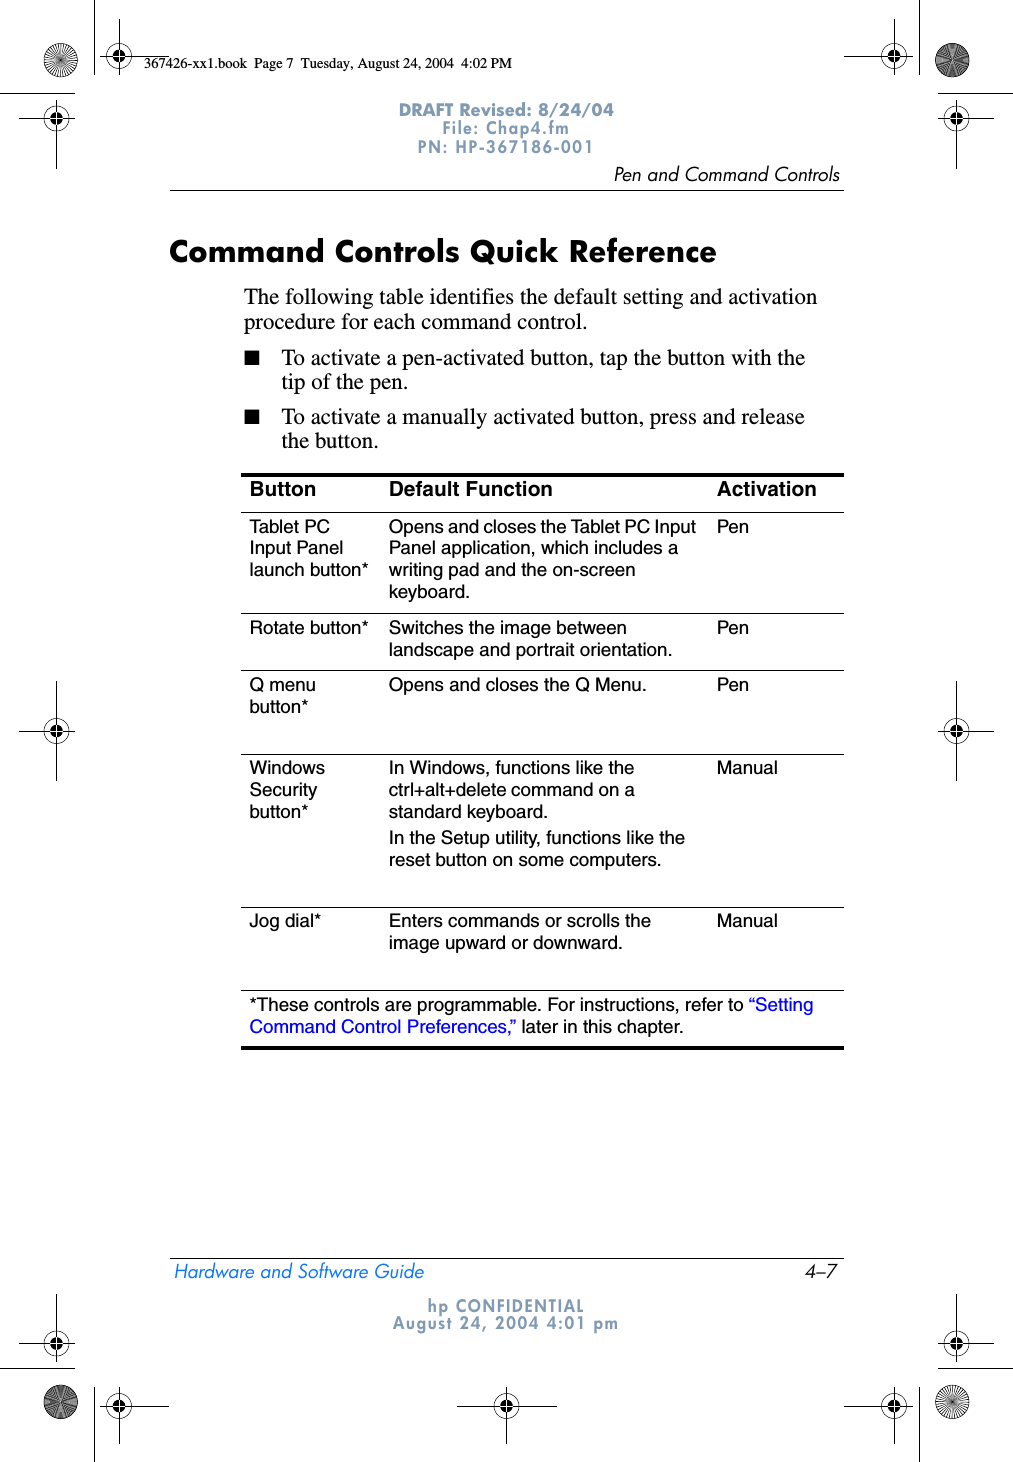 Pen and Command ControlsHardware and Software Guide 4–7DRAFT Revised: 8/24/04File: Chap4.fm PN: HP-367186-001 hp CONFIDENTIALAugust 24, 2004 4:01 pmCommand Controls Quick ReferenceThe following table identifies the default setting and activation procedure for each command control.■To activate a pen-activated button, tap the button with the tip of the pen.■To activate a manually activated button, press and release the button.Button Default Function ActivationTable t PC Input Panel launch button*Opens and closes the Tablet PC Input Panel application, which includes a writing pad and the on-screen keyboard.PenRotate button* Switches the image between landscape and portrait orientation.PenQ menu button*Opens and closes the Q Menu. PenWindows Security button*In Windows, functions like the ctrl+alt+delete command on a standard keyboard.In the Setup utility, functions like the reset button on some computers.ManualJog dial* Enters commands or scrolls the image upward or downward.Manual*These controls are programmable. For instructions, refer to “Setting Command Control Preferences,” later in this chapter.367426-xx1.book  Page 7  Tuesday, August 24, 2004  4:02 PM